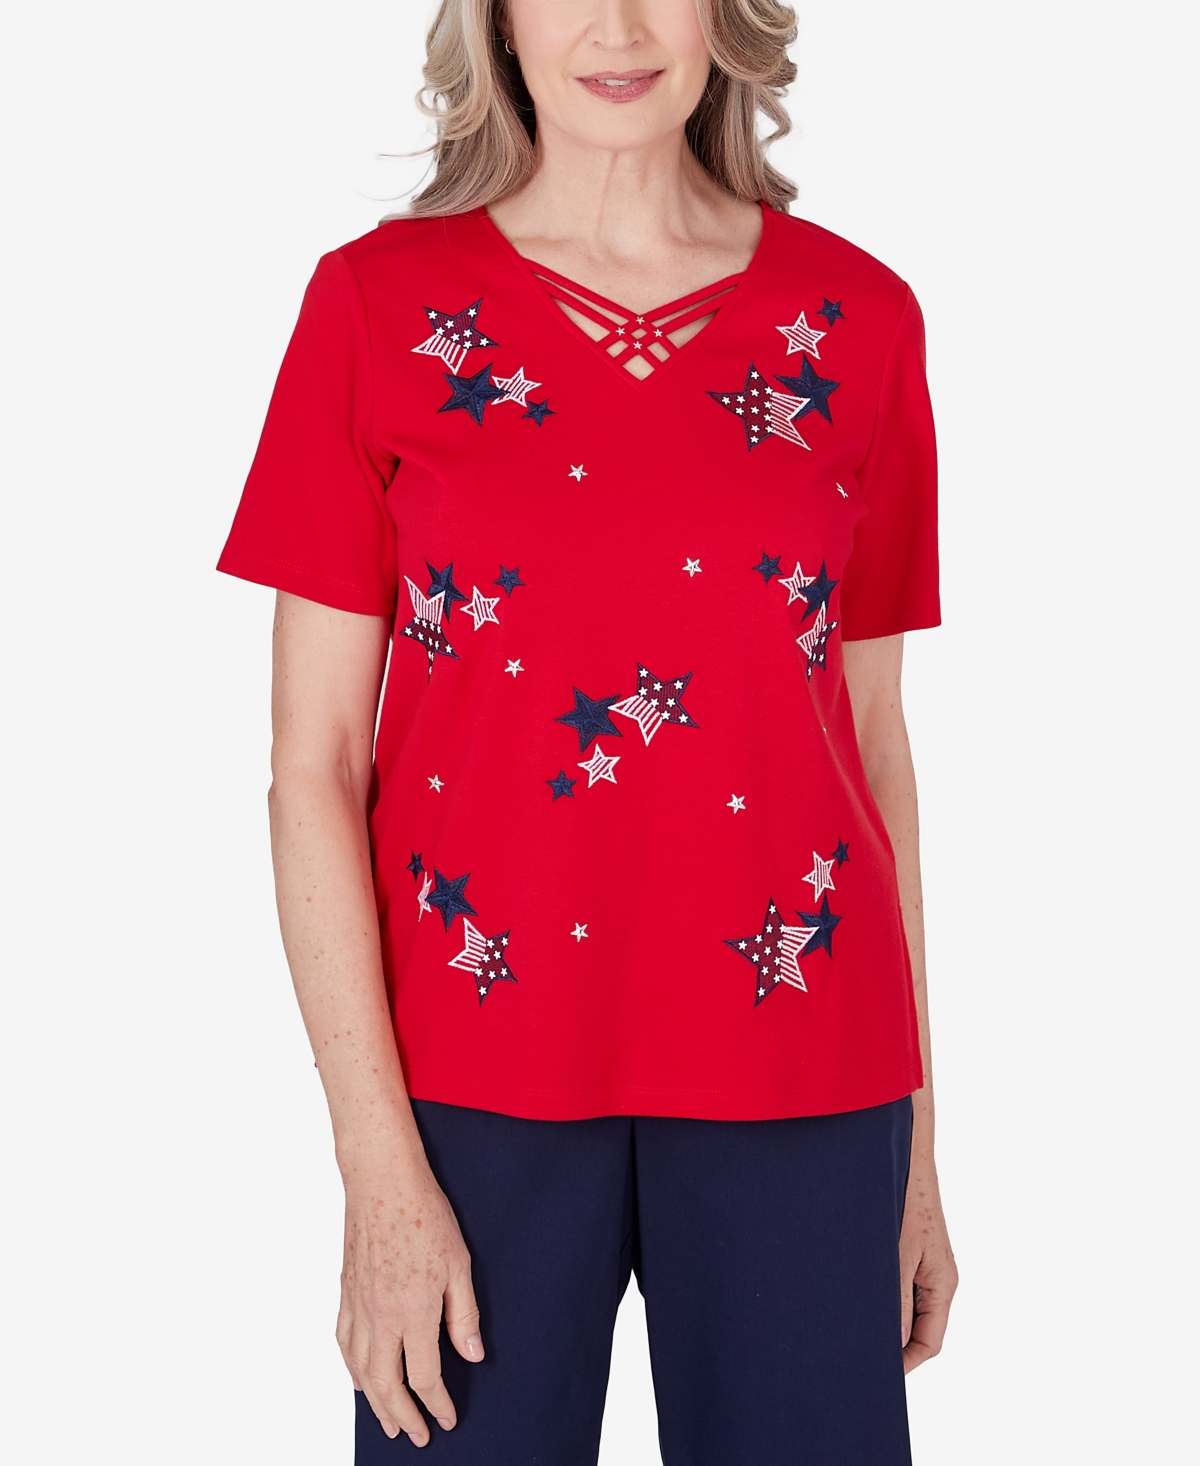 Women's All American Embroidered Stars Short Sleeve Top - Red